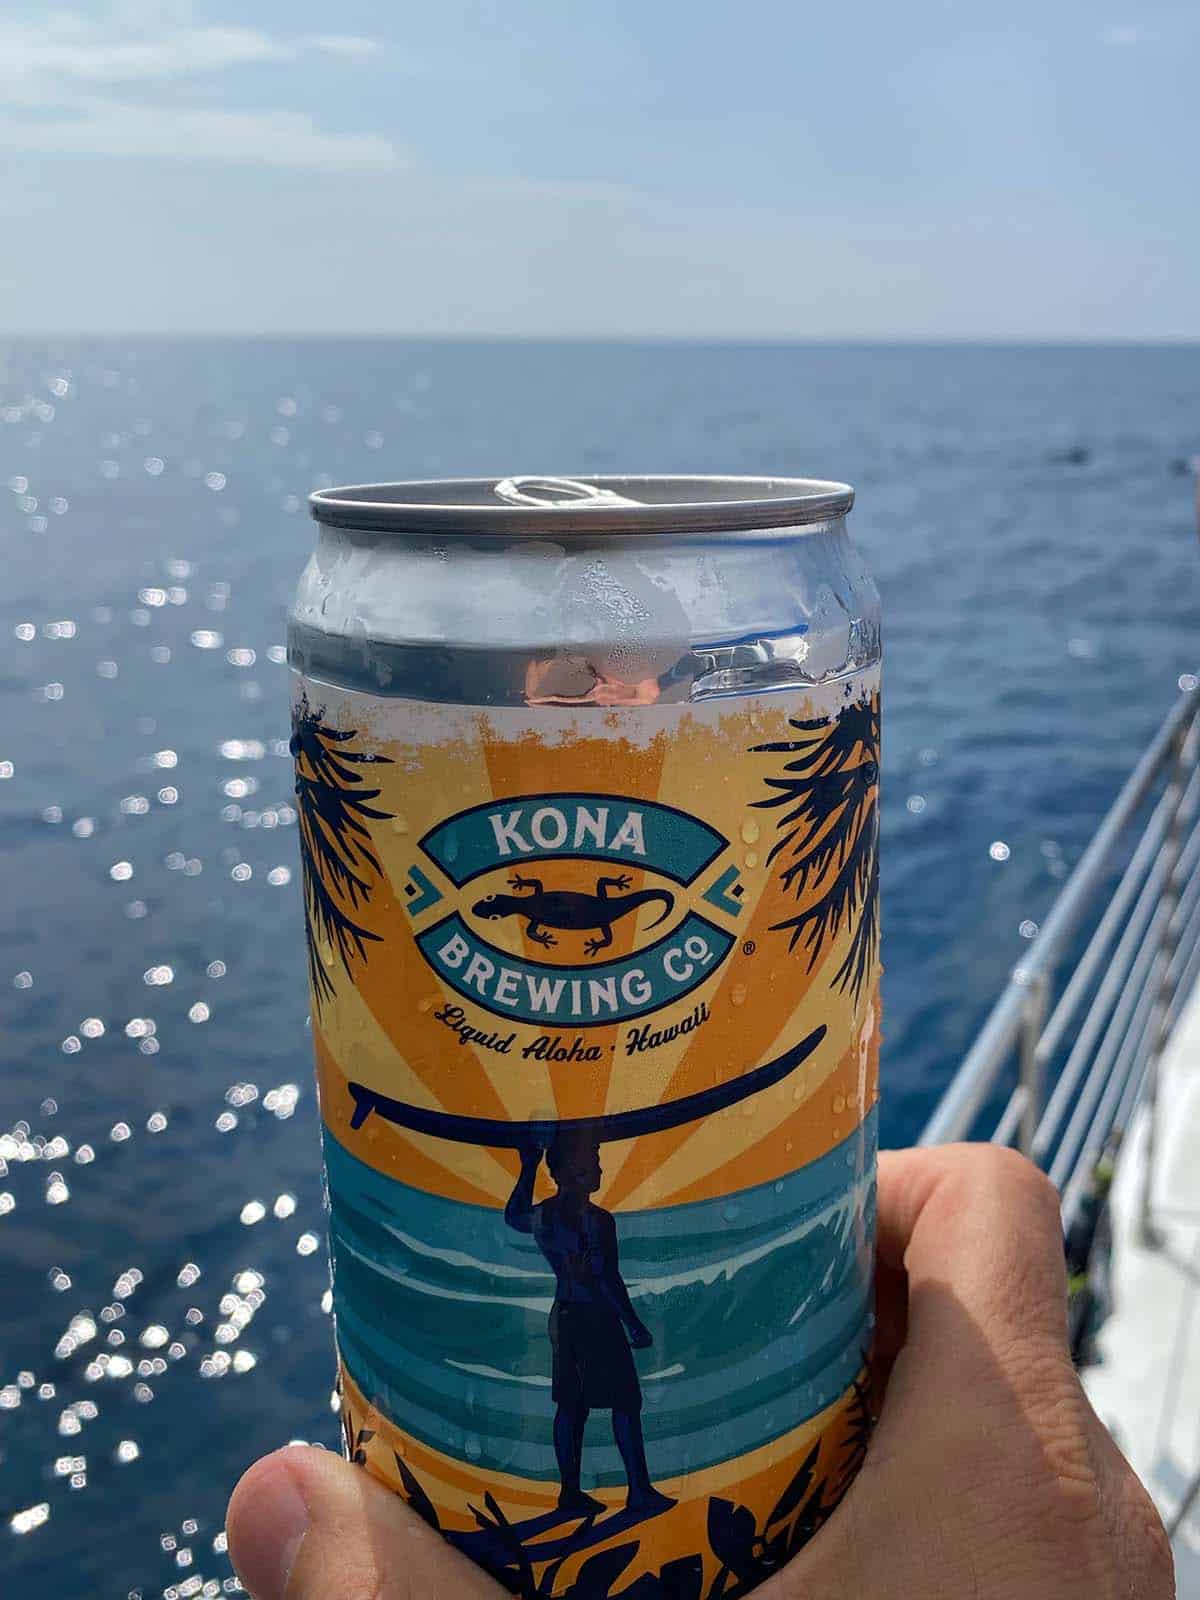 A can of Kona brewing above the ocean.